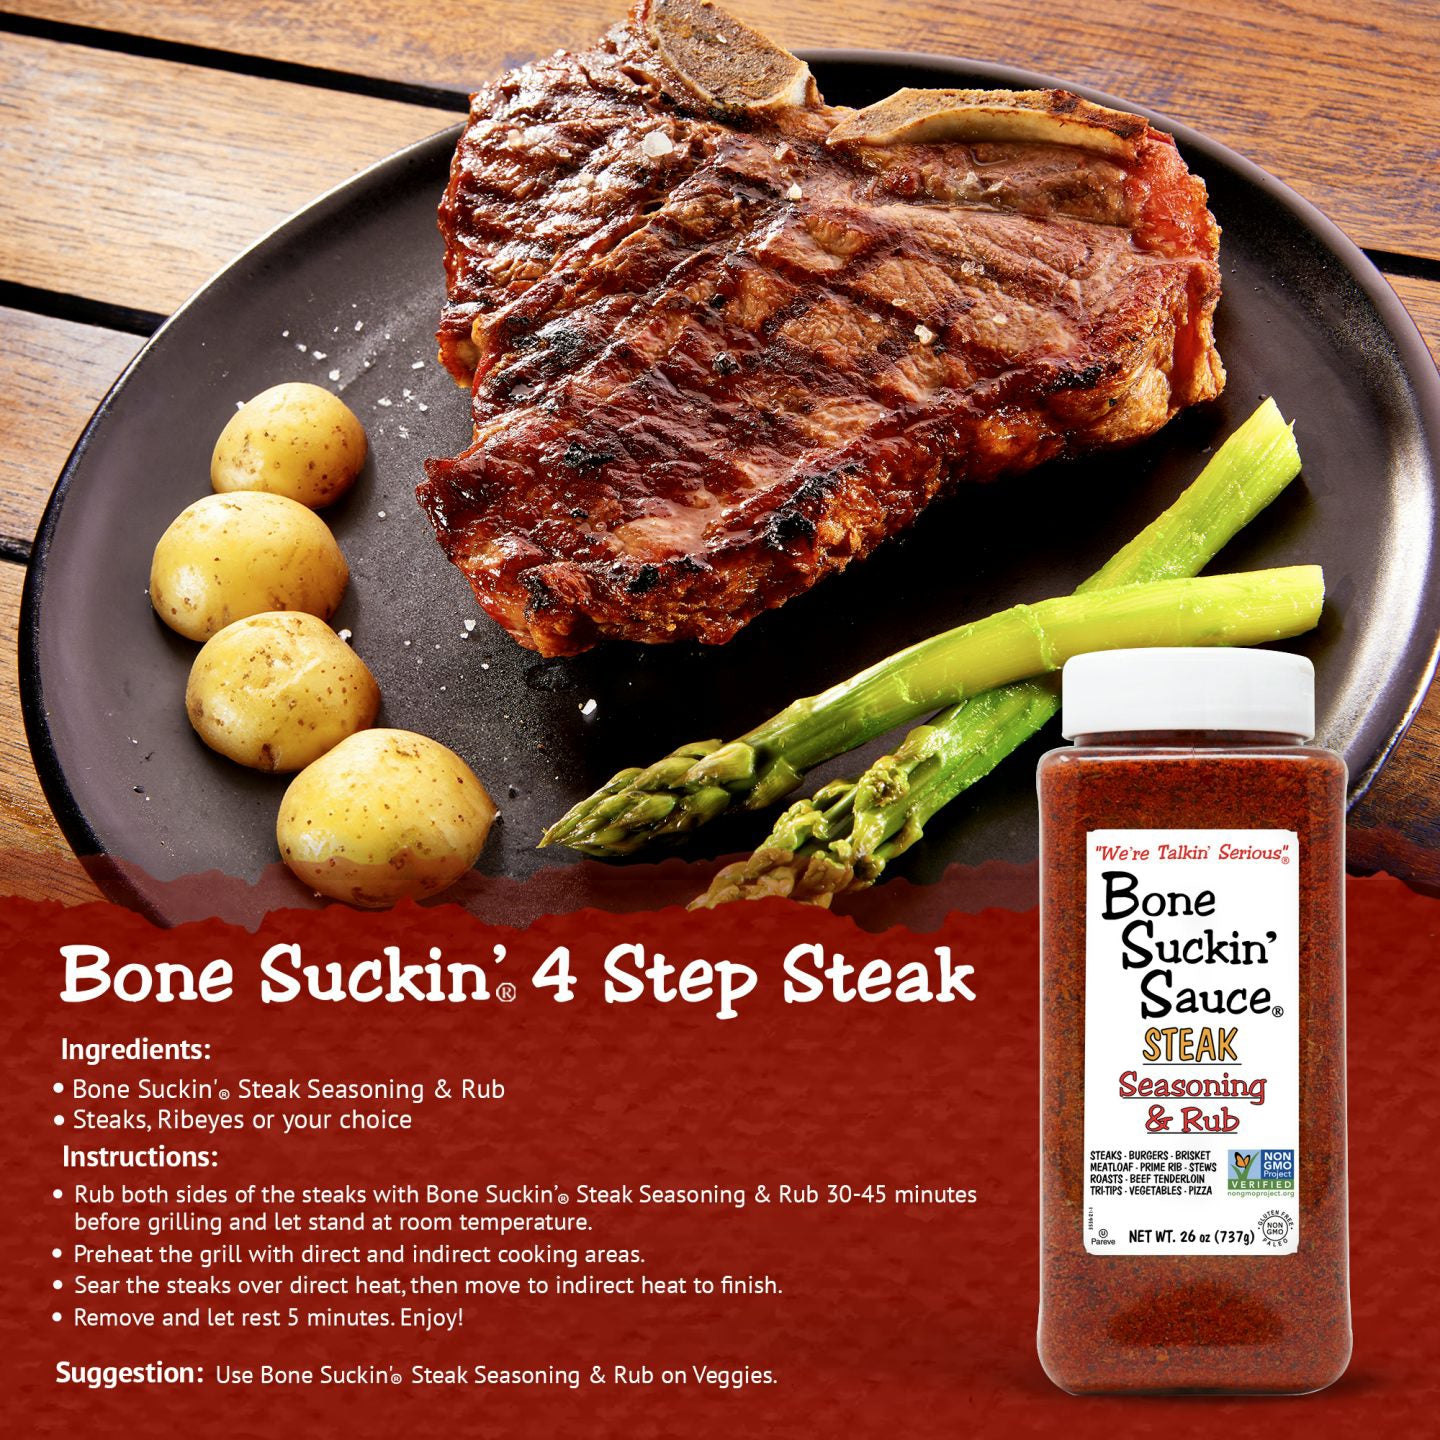 Bone Suckin 4 Step Steak Recipe. Ingredients: Bone Suckin Steak seasoning & rub. Steaks, ribeye or your choice. Instructions: Rub both sides of the steaks with the Bone Suckin Steak Seasoning & Rub 30-45 minutes before grilling and let stand at room temperature.  Prheat the grill with direct and indirect cooking areas. Sear the steaks over direct heat, then move to indirect heat to finish. Remove and let rest 5 minutes. Enjoy!